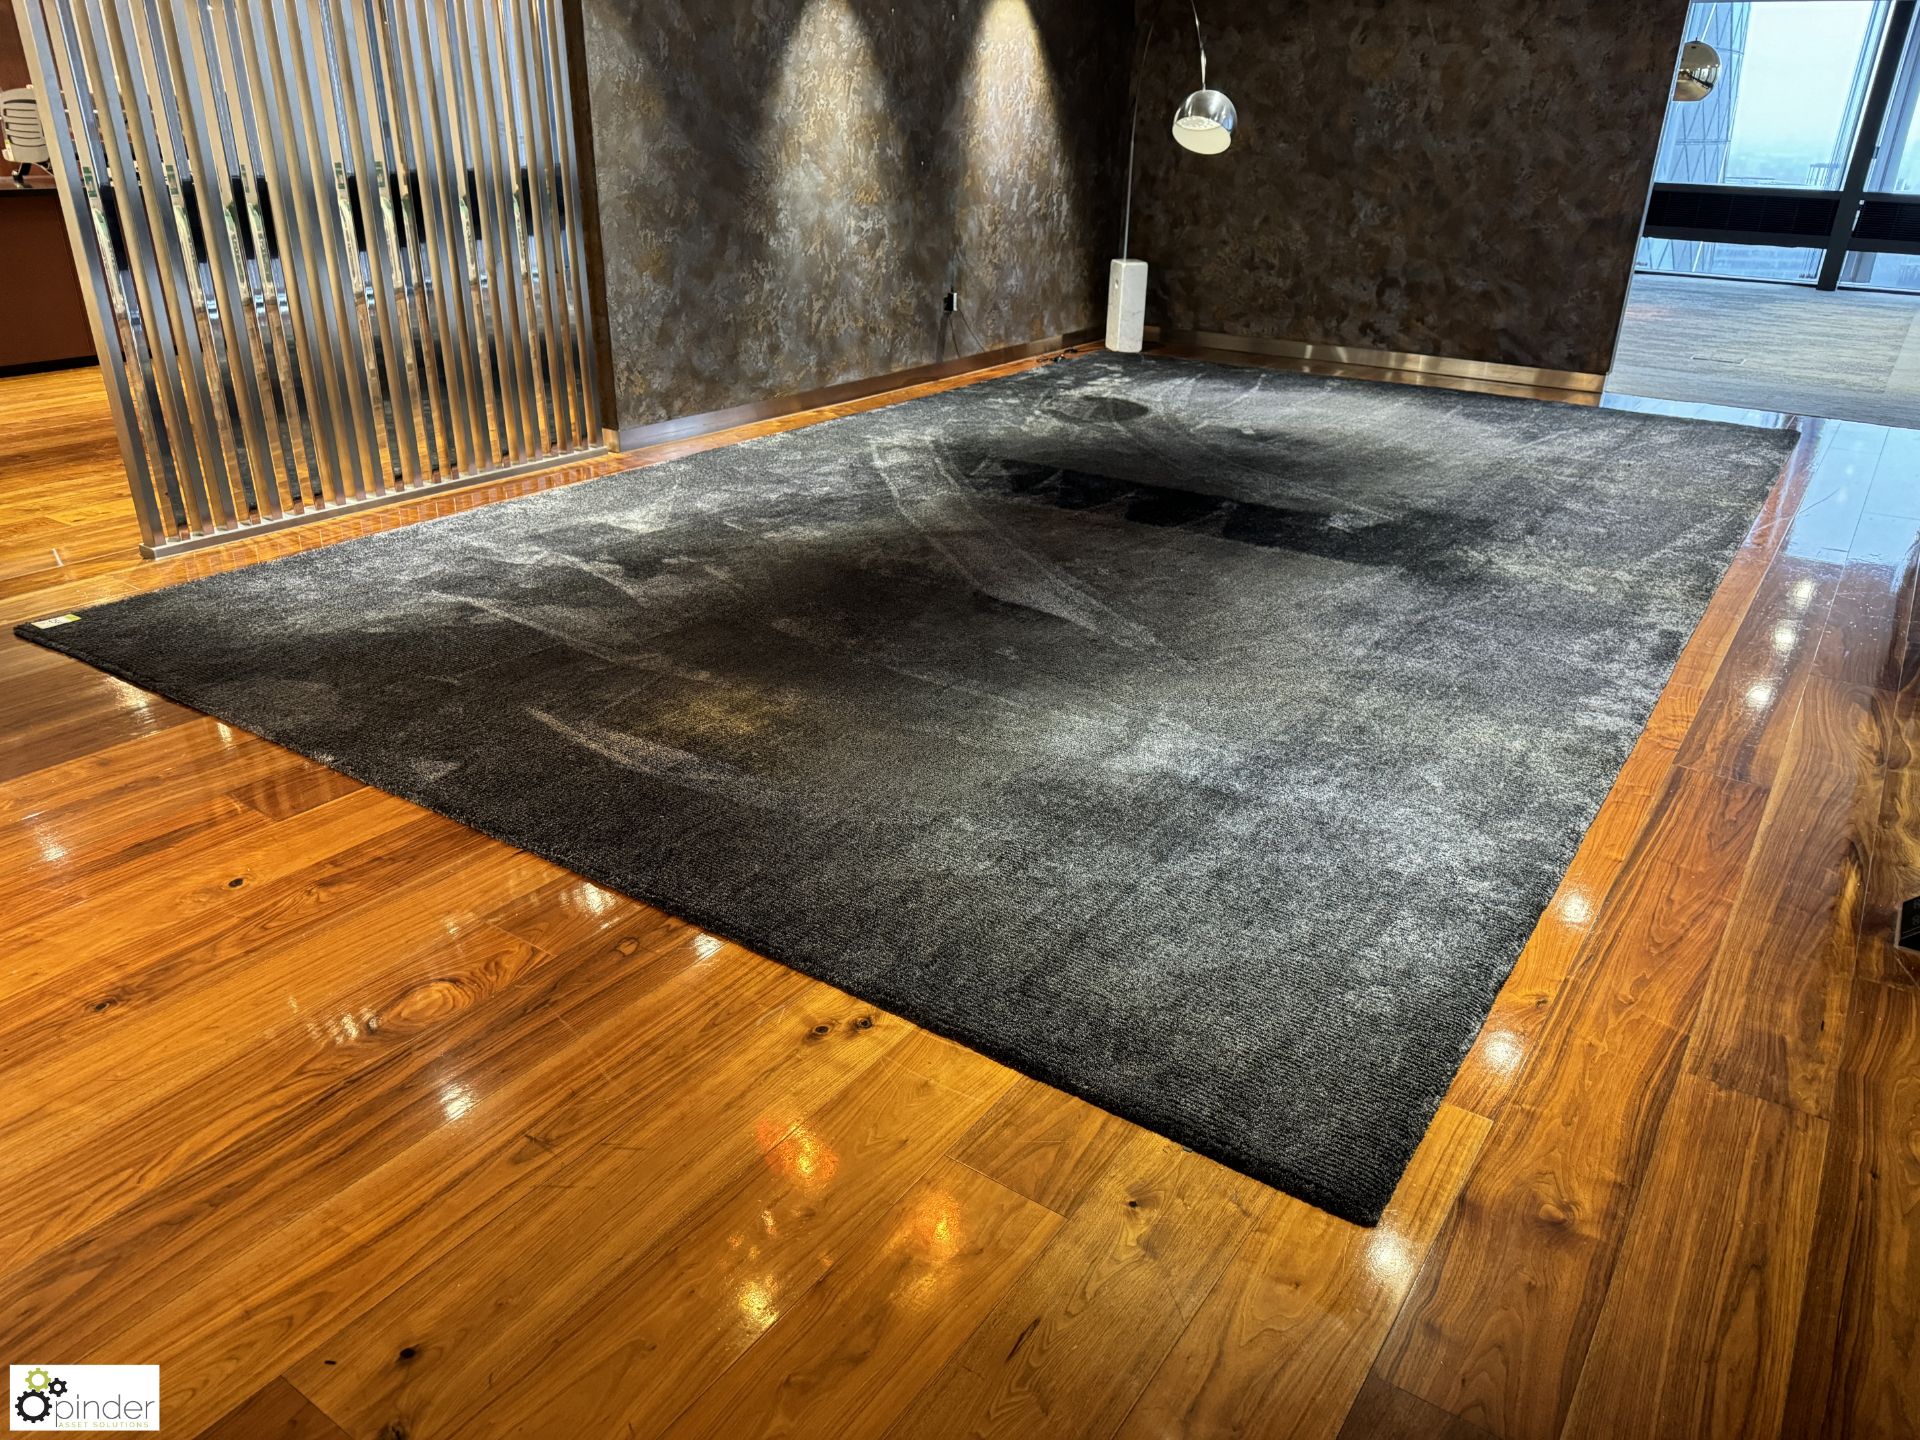 BIC Luxury Rug “Shadow 1483 Ivory Black”, 6450mm x 4000mm (location in building – level 22) - Image 2 of 5